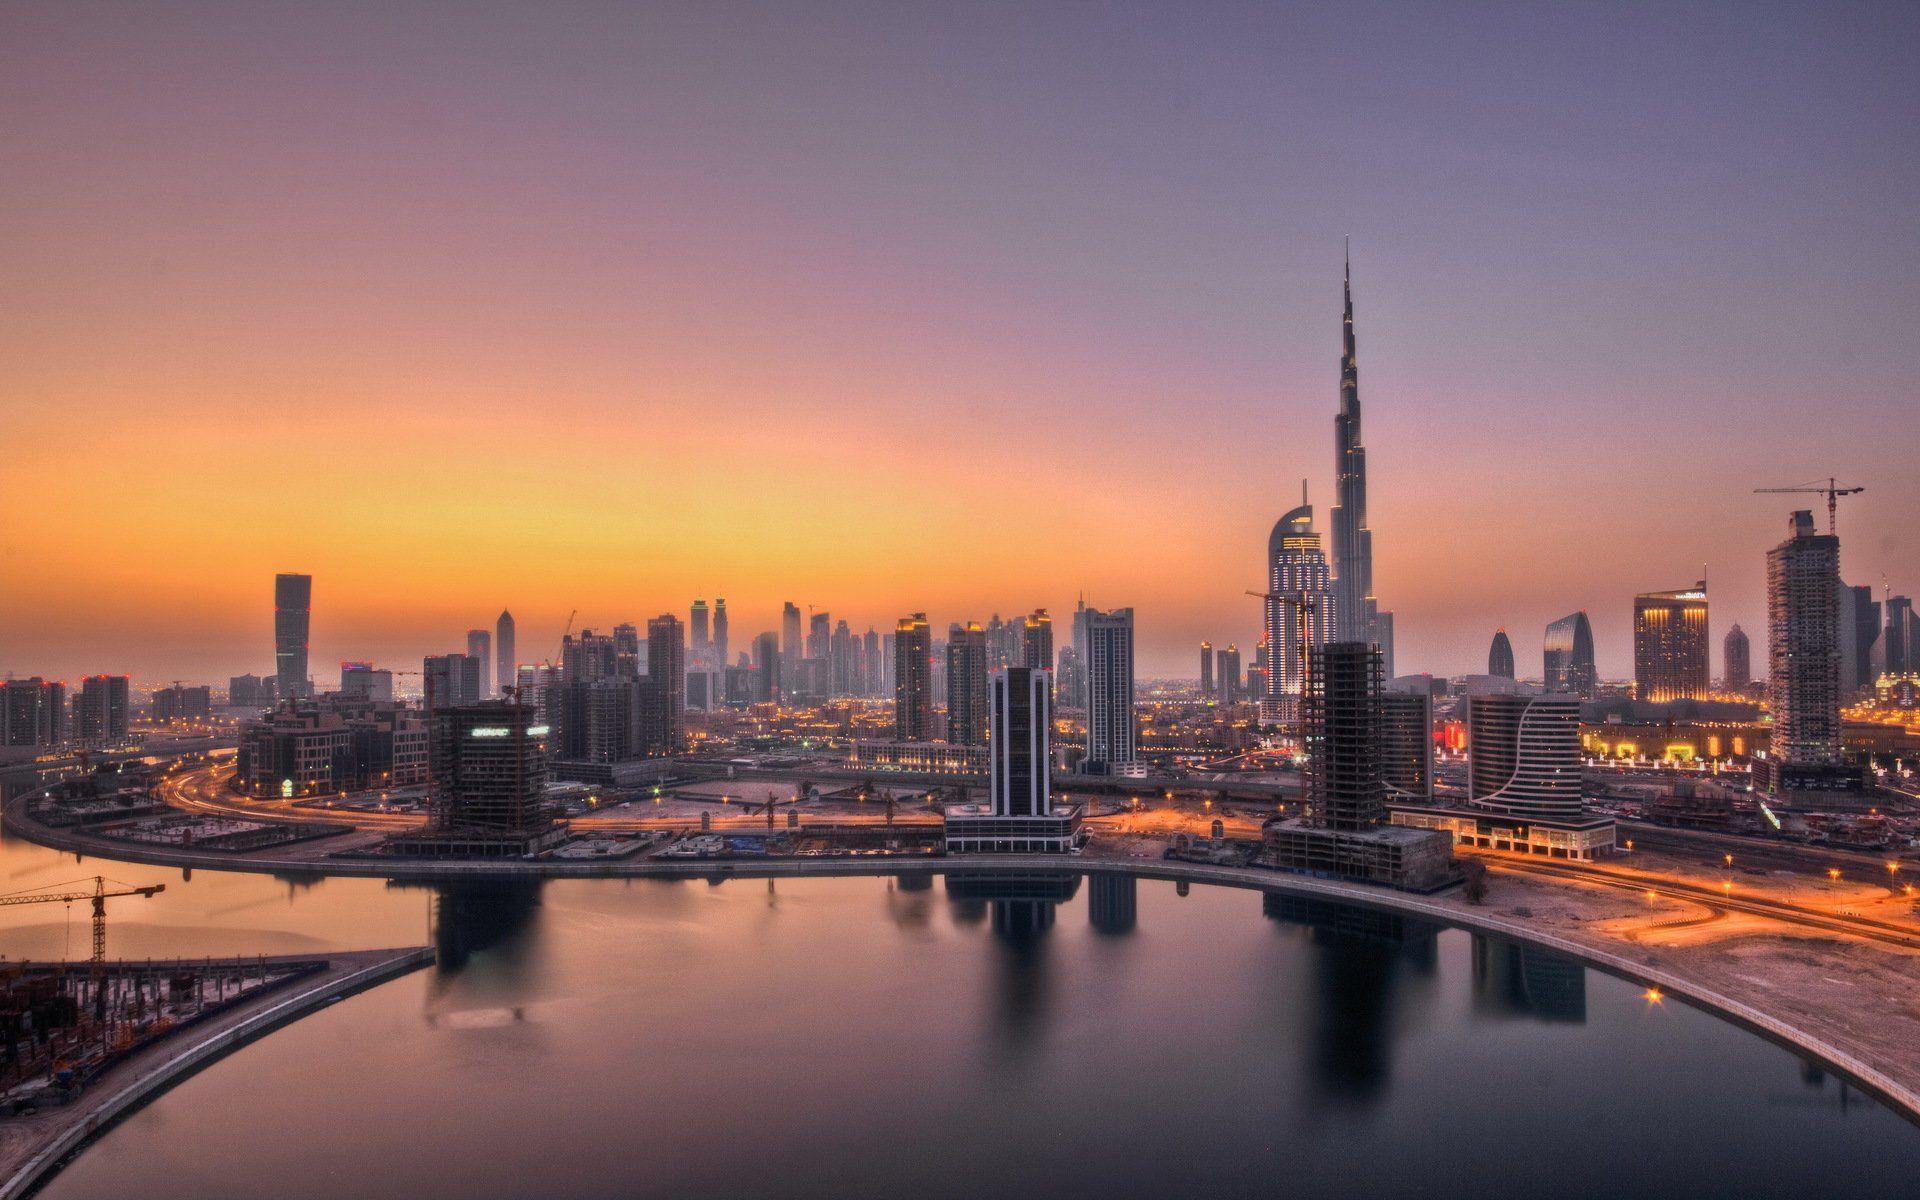 Dubai skyline at sunset with a pool in the foreground - Dubai